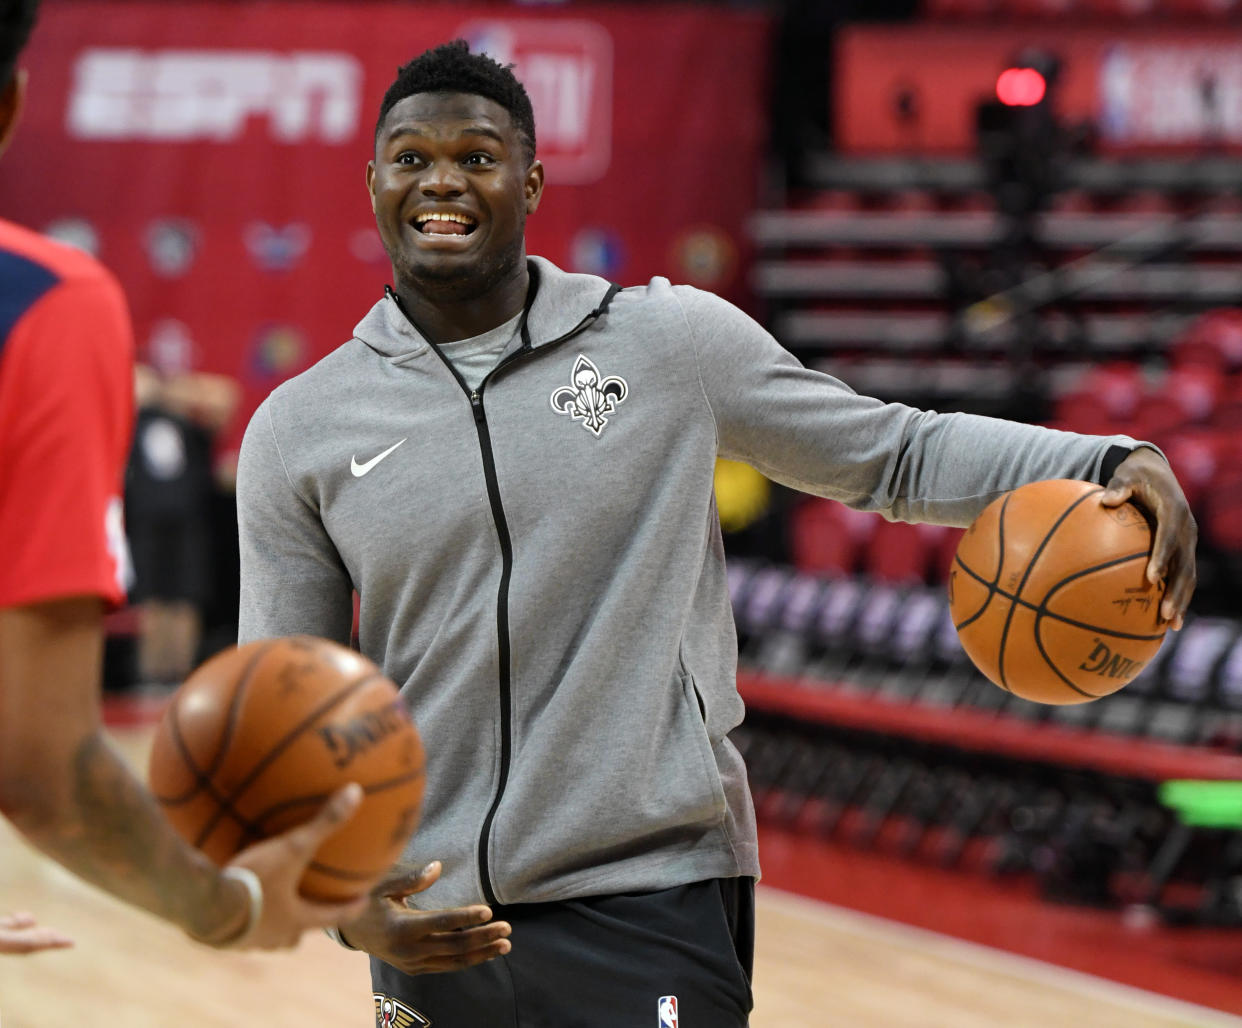 Zion Williamson is already beloved by the city of New Orleans. (Photo by Ethan Miller/Getty Images)